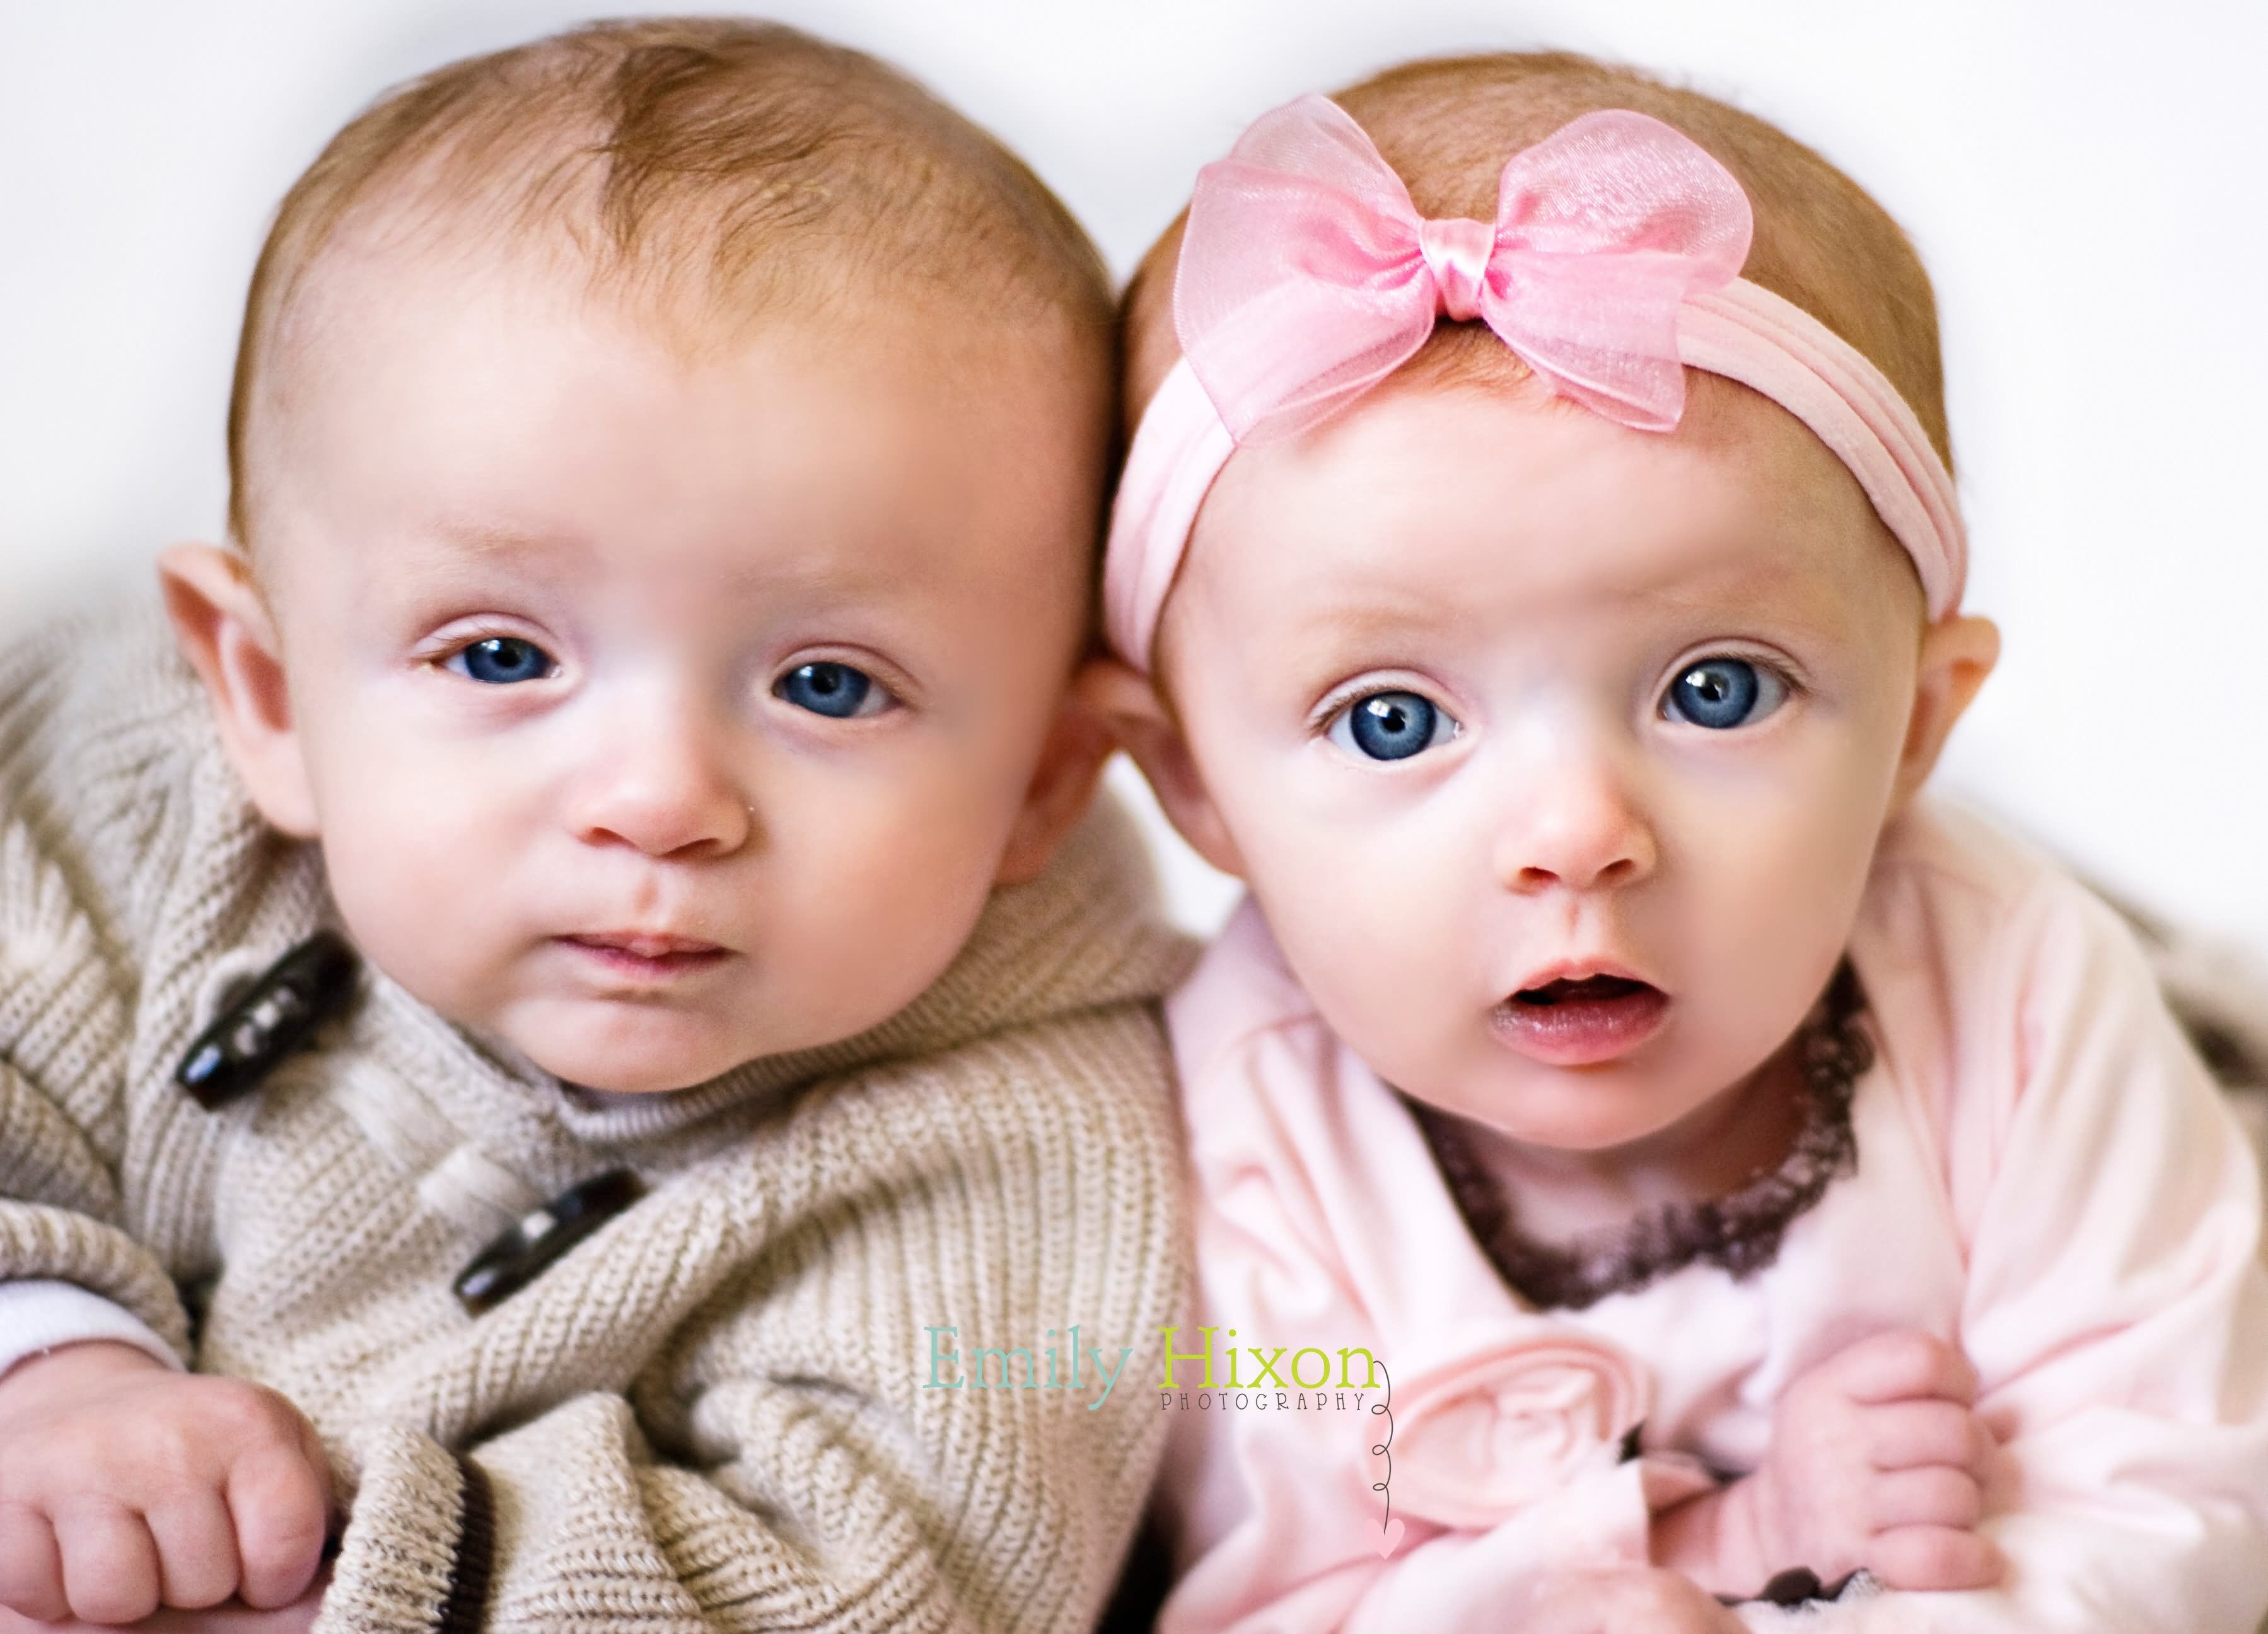 cute twin babies wallpapers for girls